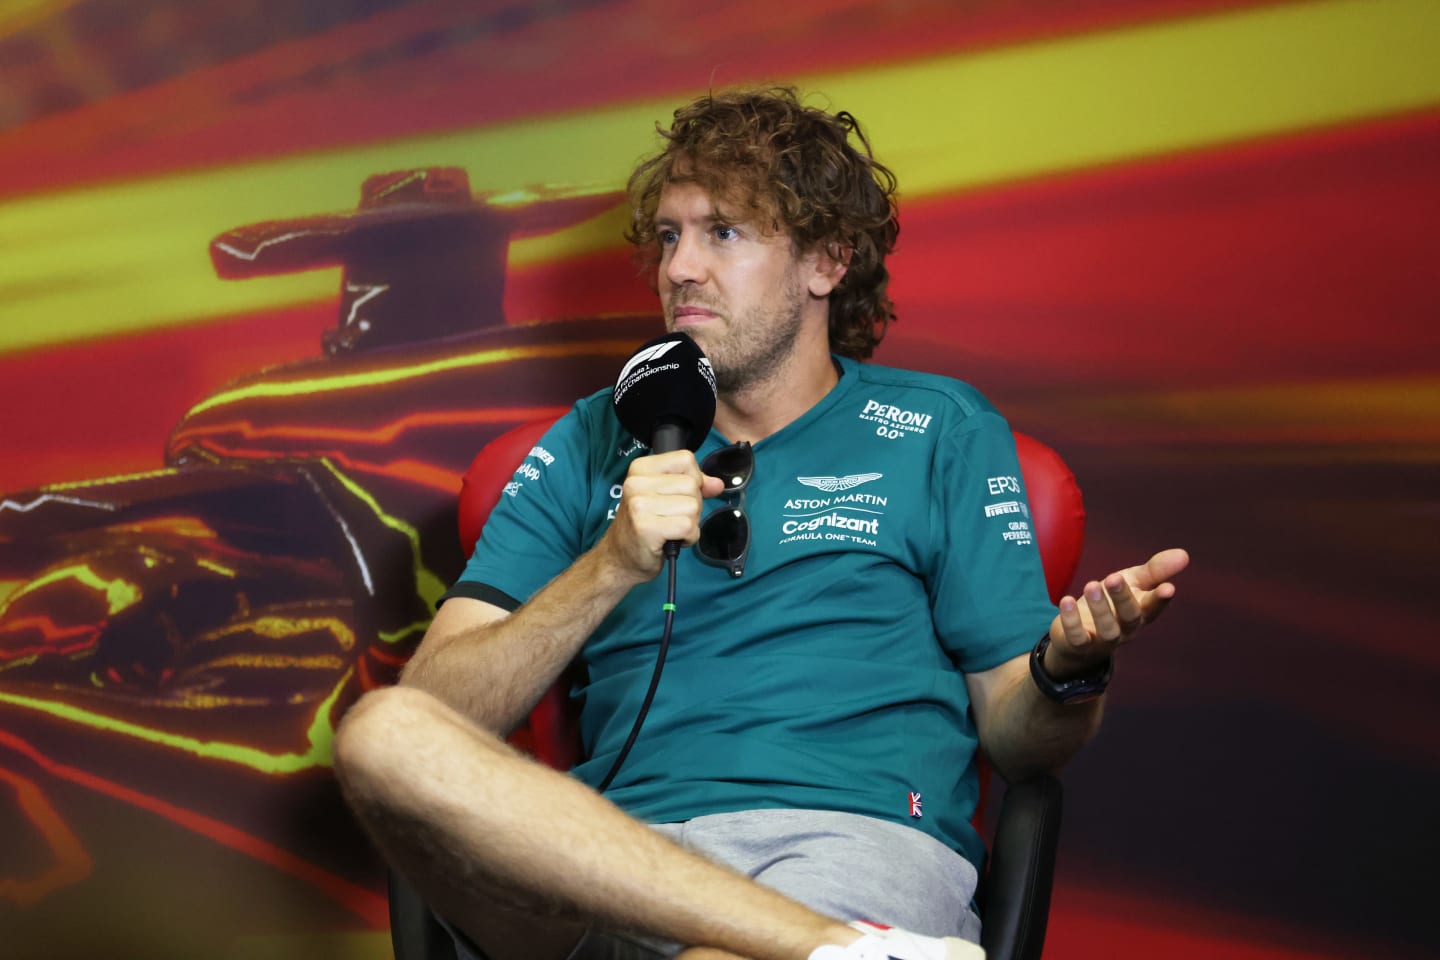 BARCELONA, SPAIN - MAY 20: Sebastian Vettel of Germany and Aston Martin F1 Team talks in the Drivers Press Conference prior to practice ahead of the F1 Grand Prix of Spain at Circuit de Barcelona-Catalunya on May 20, 2022 in Barcelona, Spain. (Photo by Bryn Lennon/Getty Images)